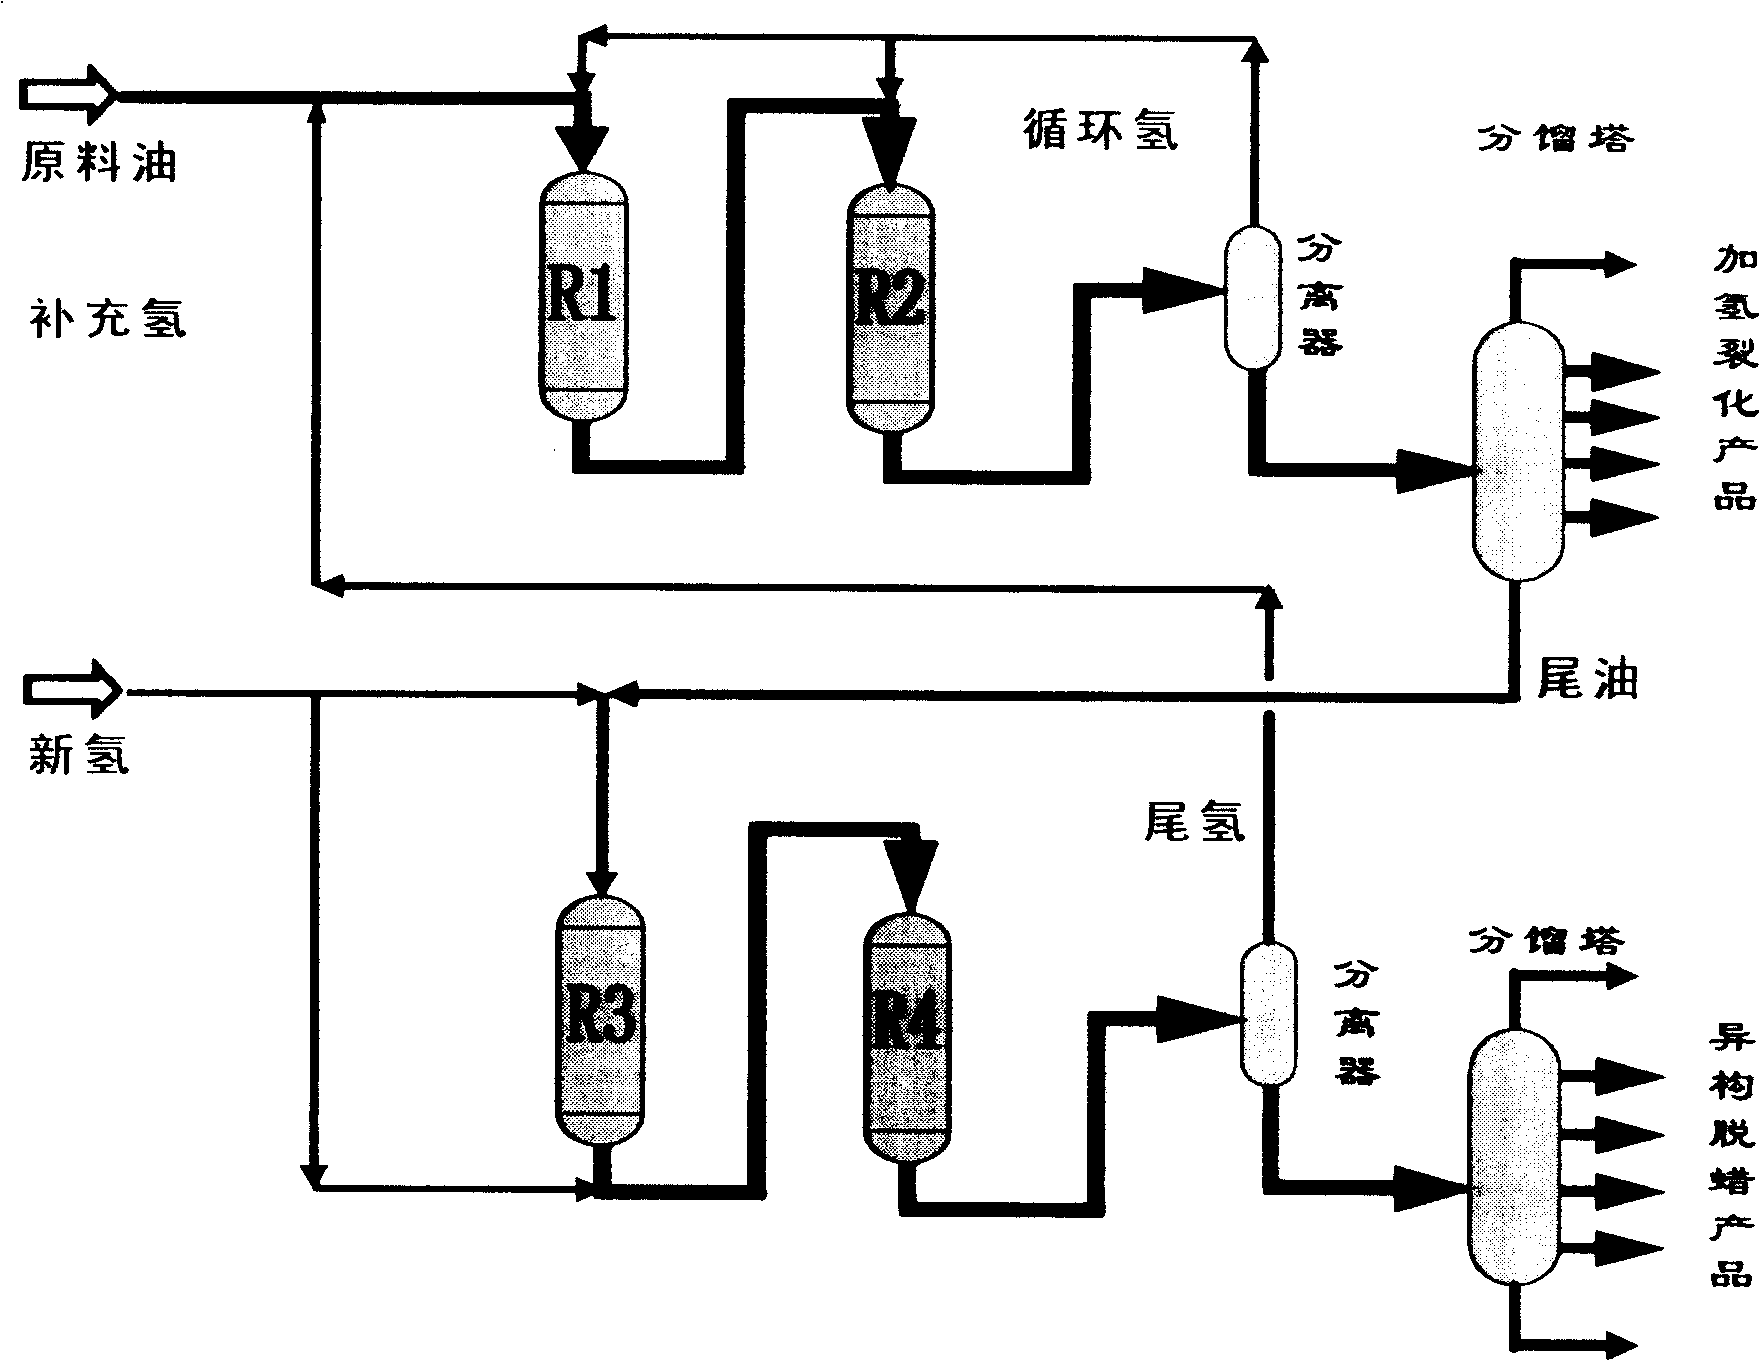 Combined technological process for producing lube oil base stock